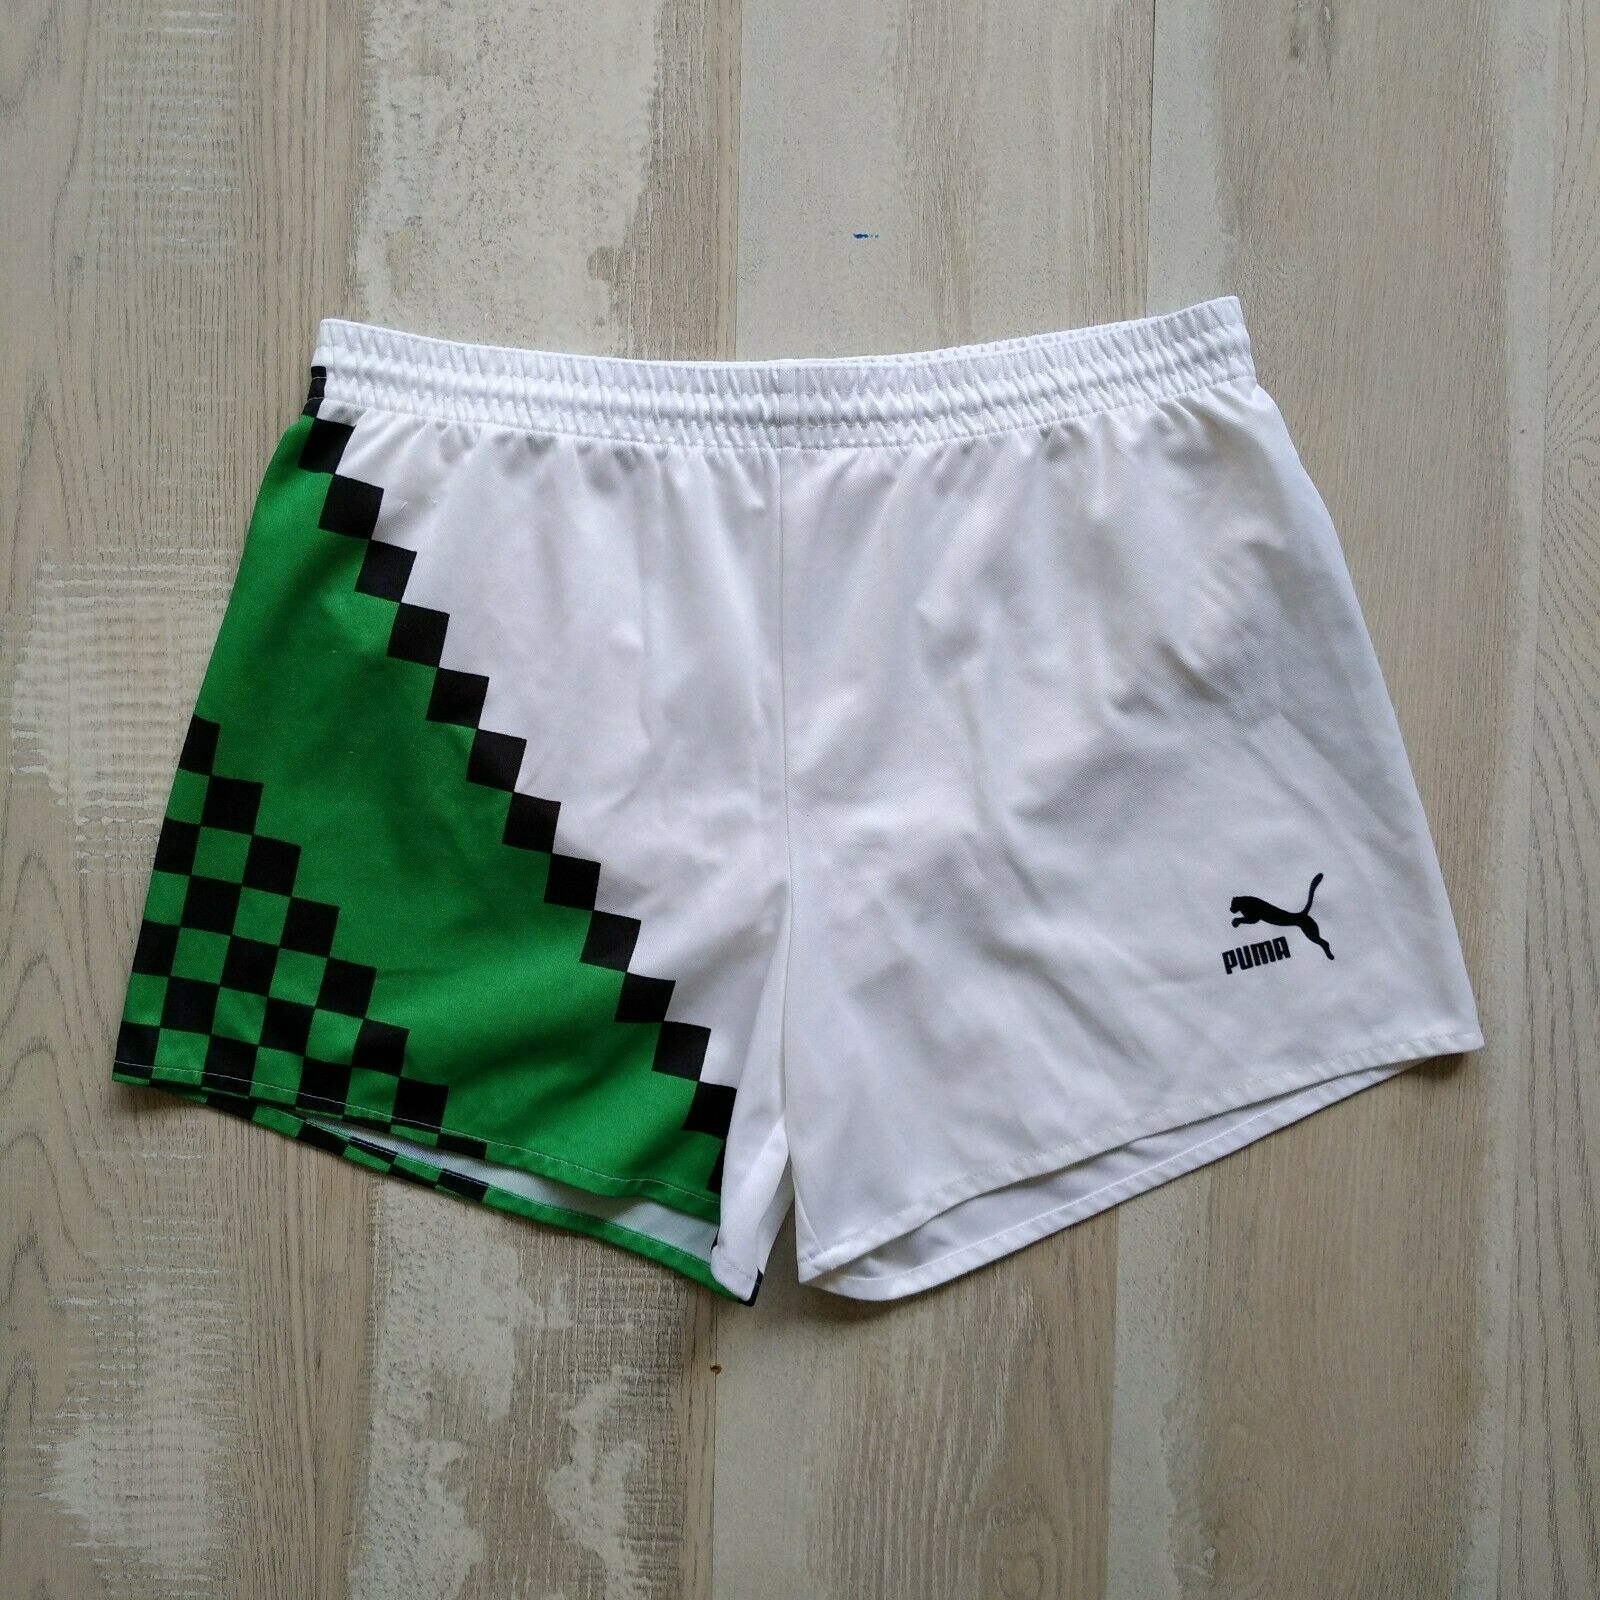 Puma Vintage Football Short White Green Polyester West Germany Mens Size M